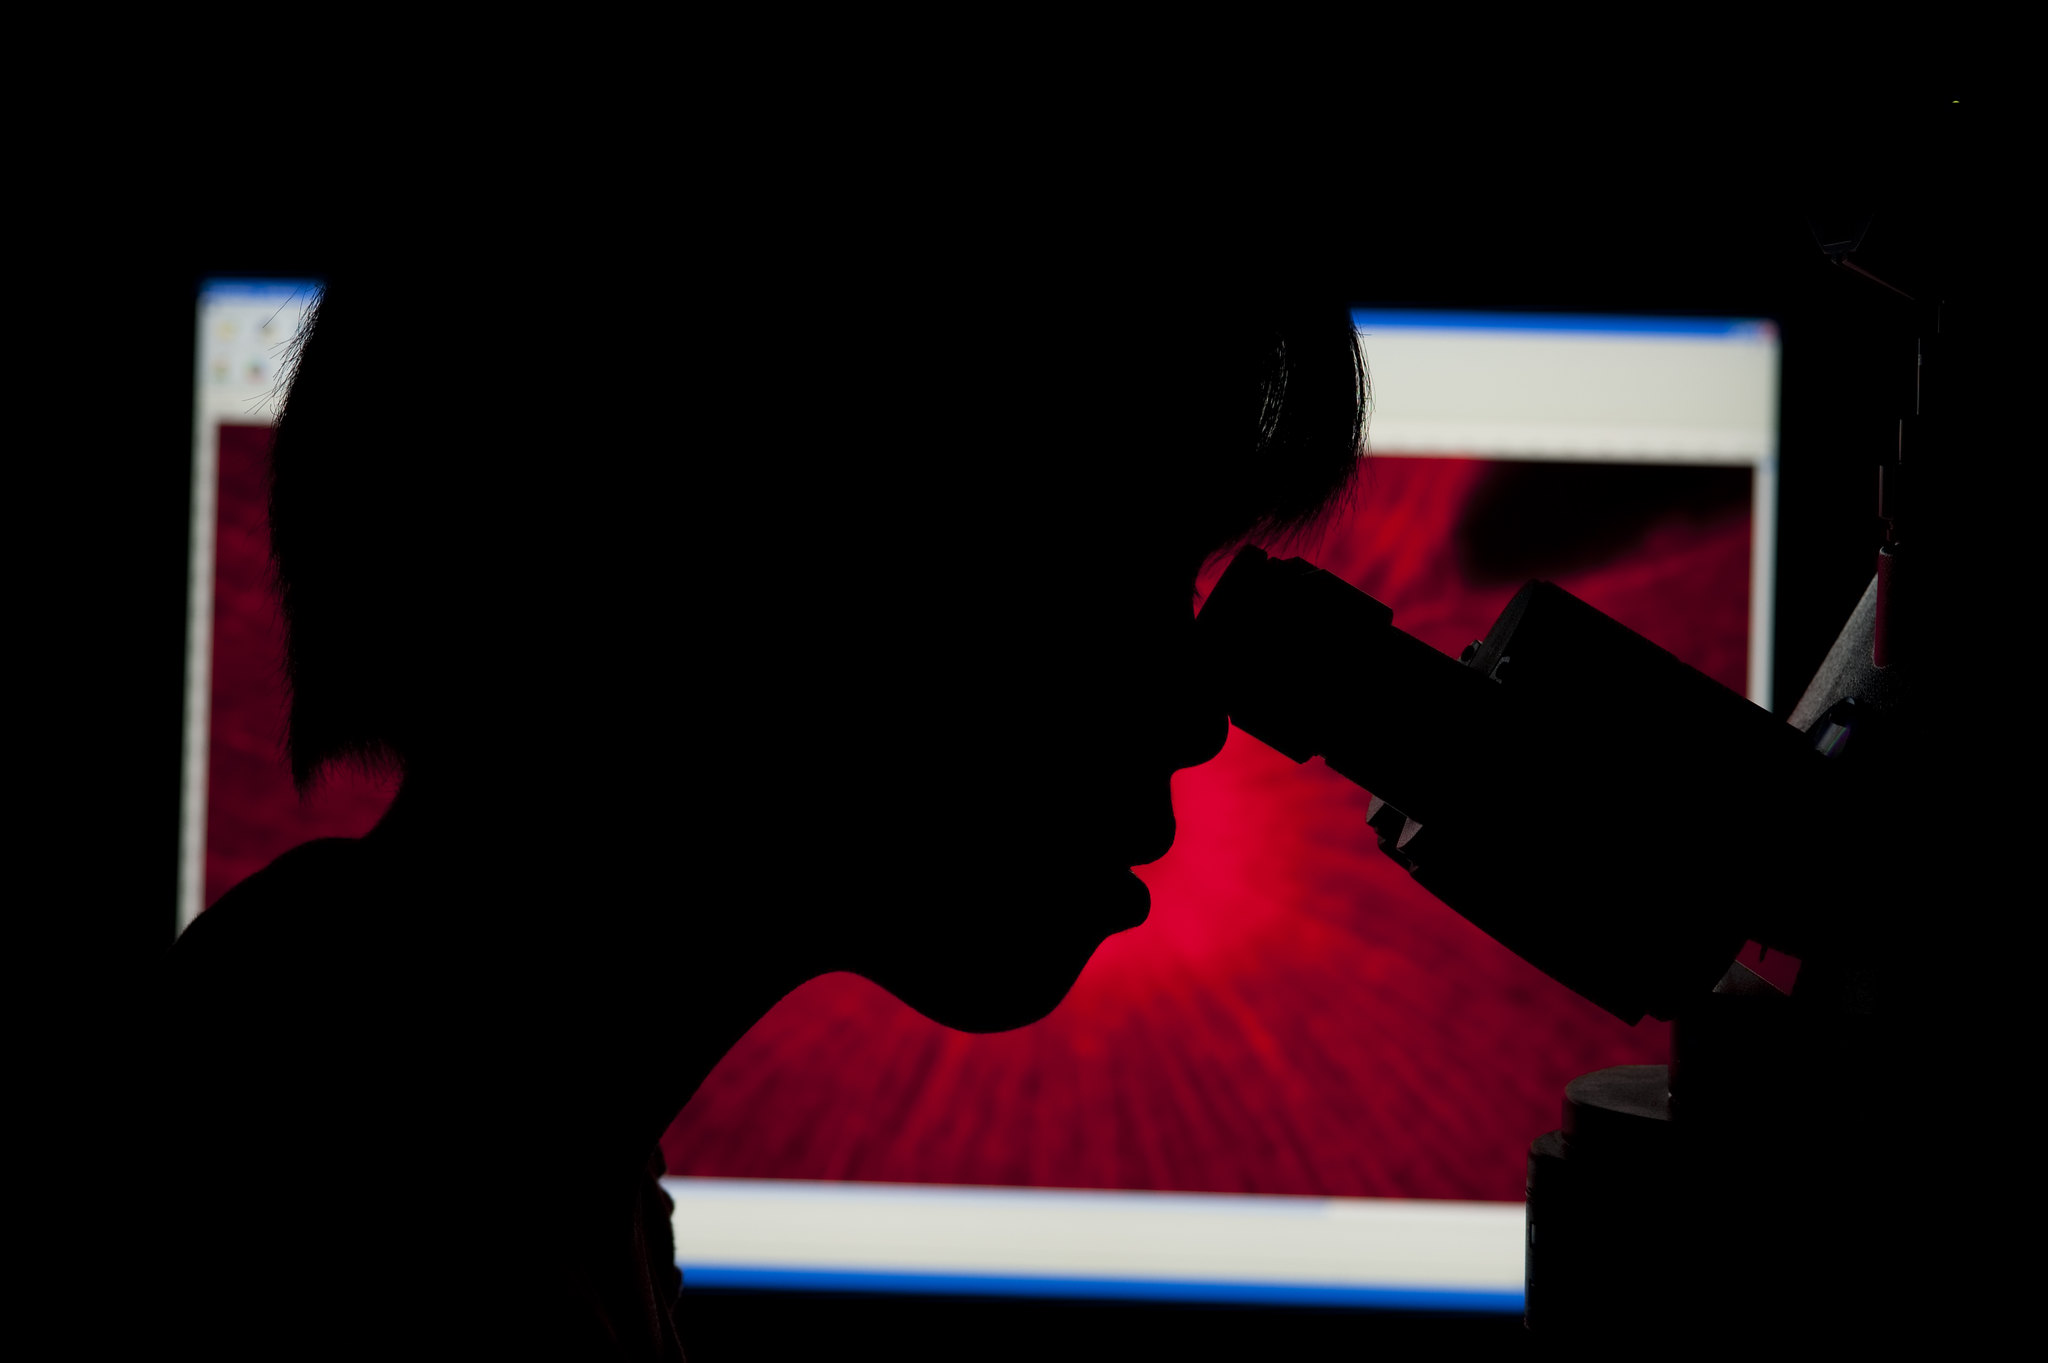 A scientist is looking through a microscope while backlit by a red image on a computer screen.